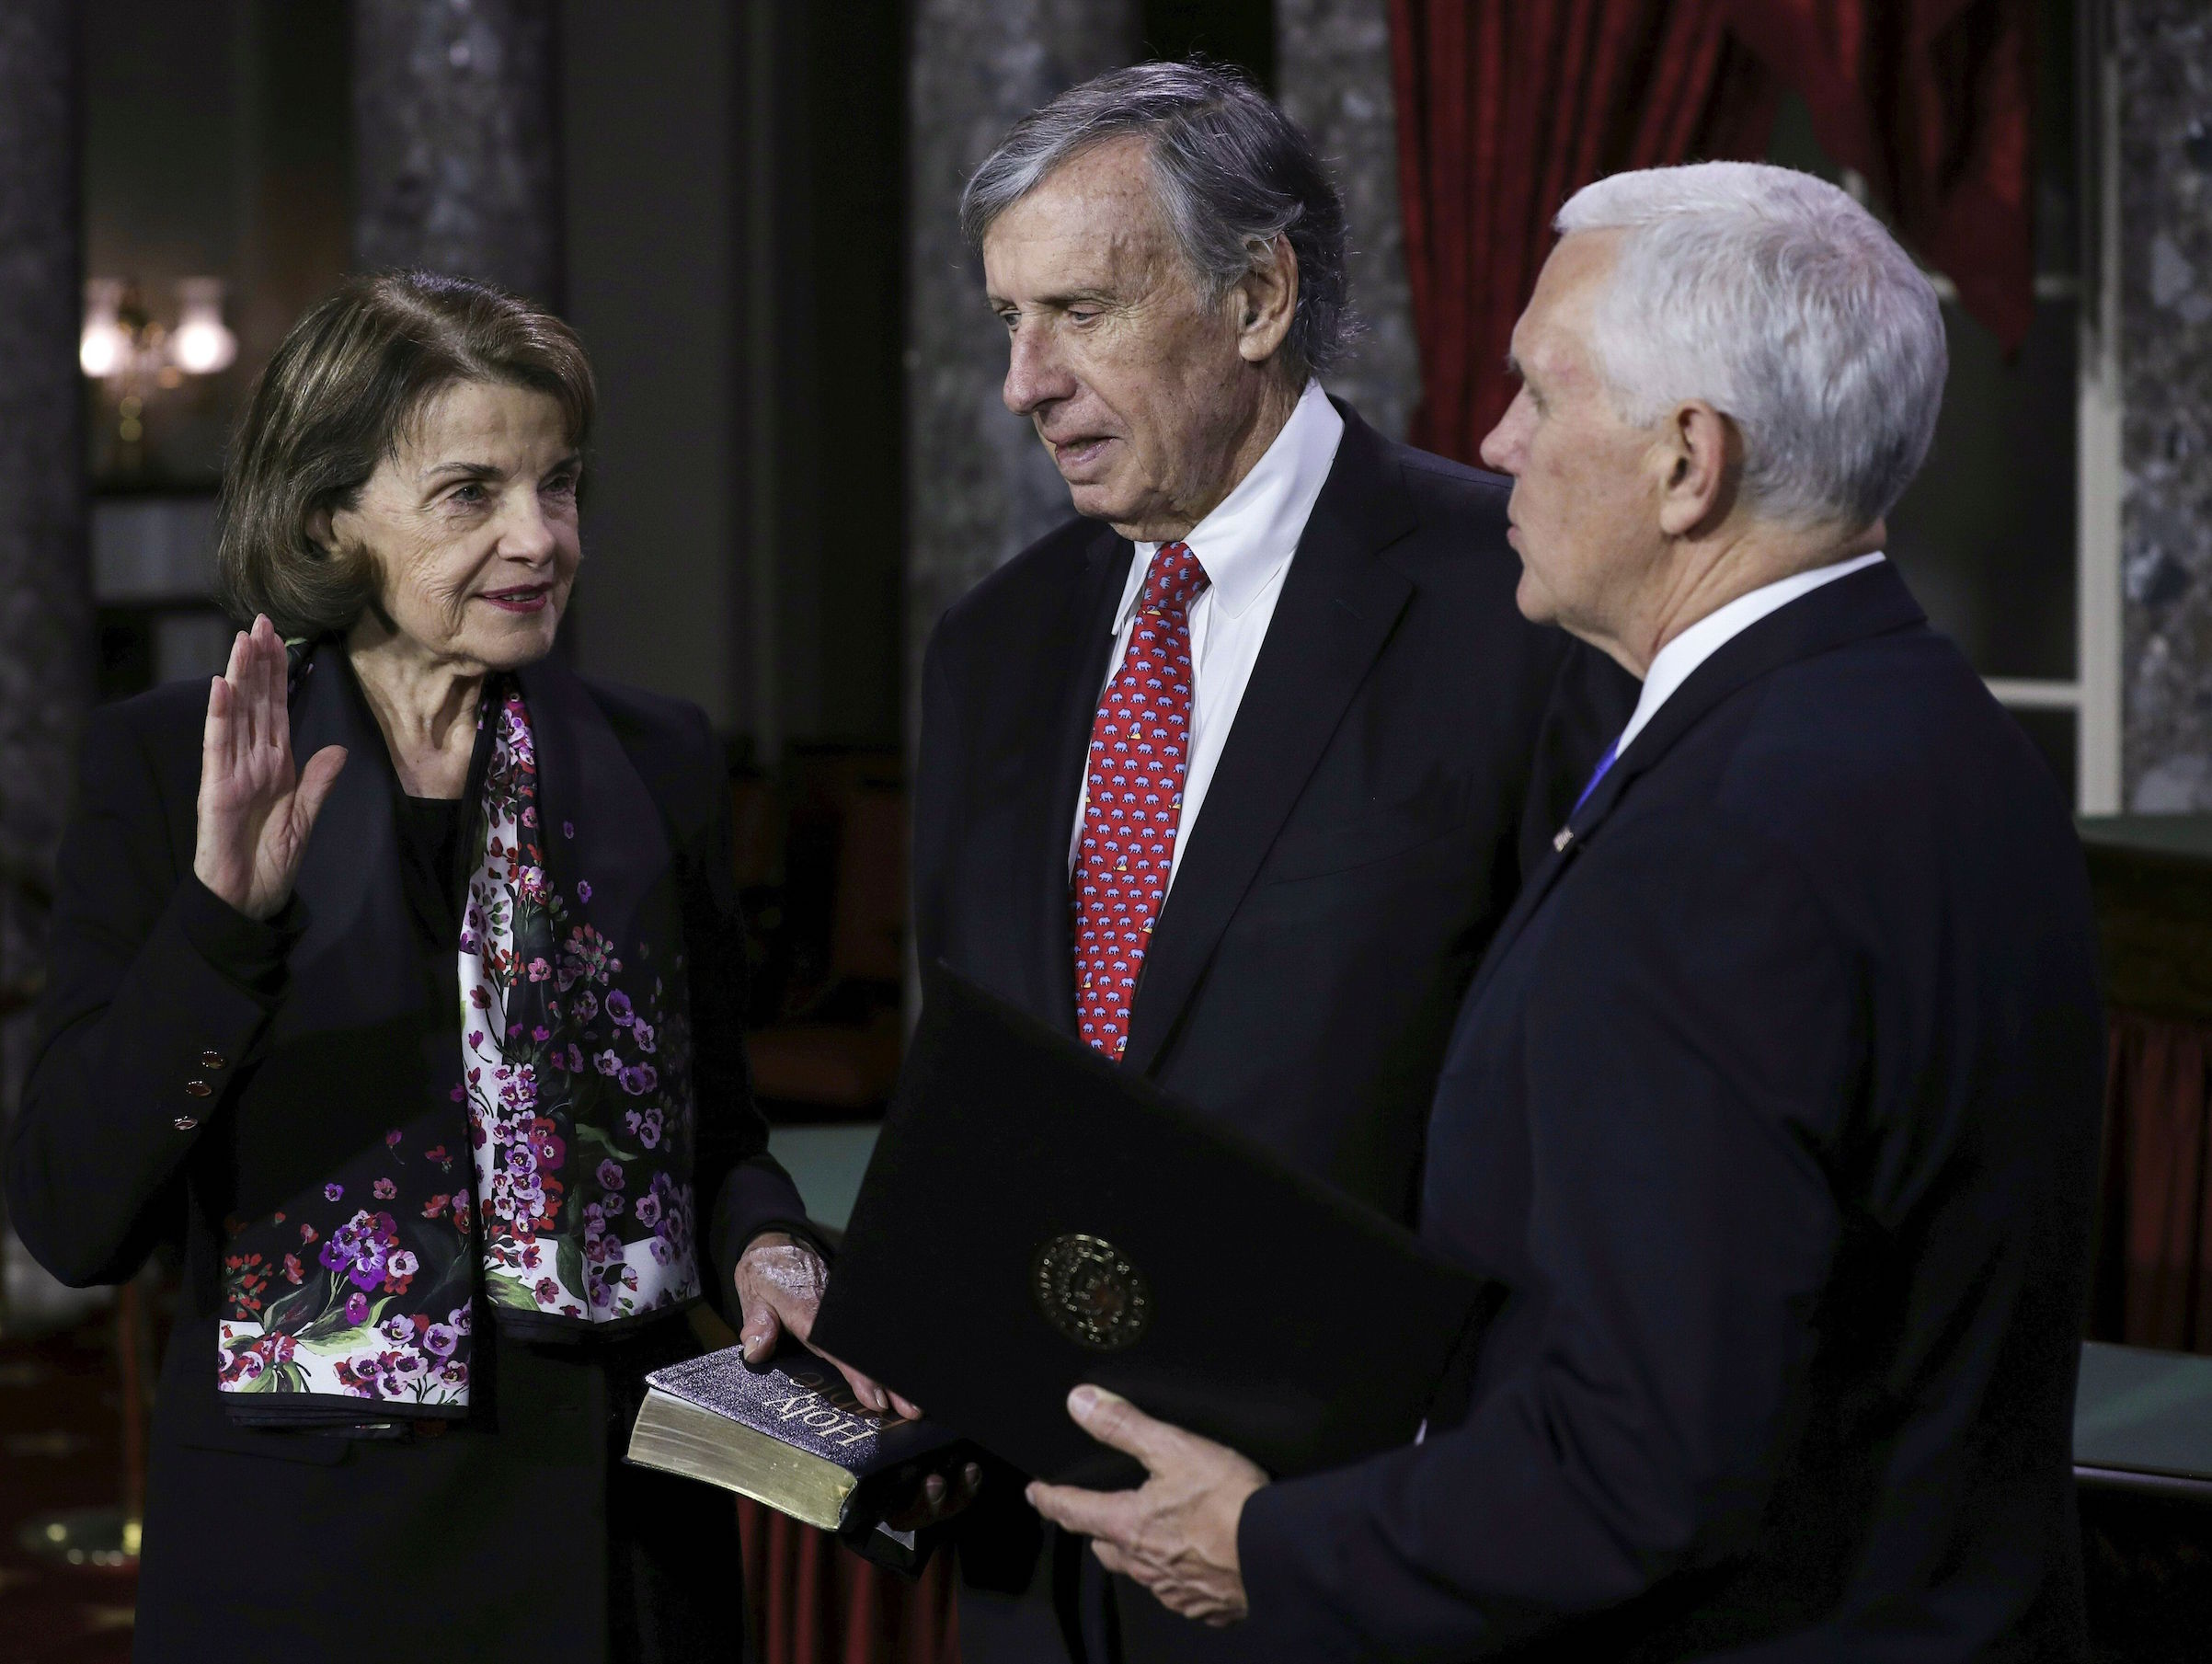 US Senator from California Dianne Feistein (L) flanked by her husband Richard Blum is sworn in by Vice President Mike Pence (R) during the swearing-in re-enactments for recently elected senators in the Old Senate Chamber on Capitol Hill January 3, 2019. (Photo by Alex EDELMAN / AFP)        (Photo credit should read ALEX EDELMAN/AFP/Getty Images) (Alex Edelman—AFP/Getty Images)